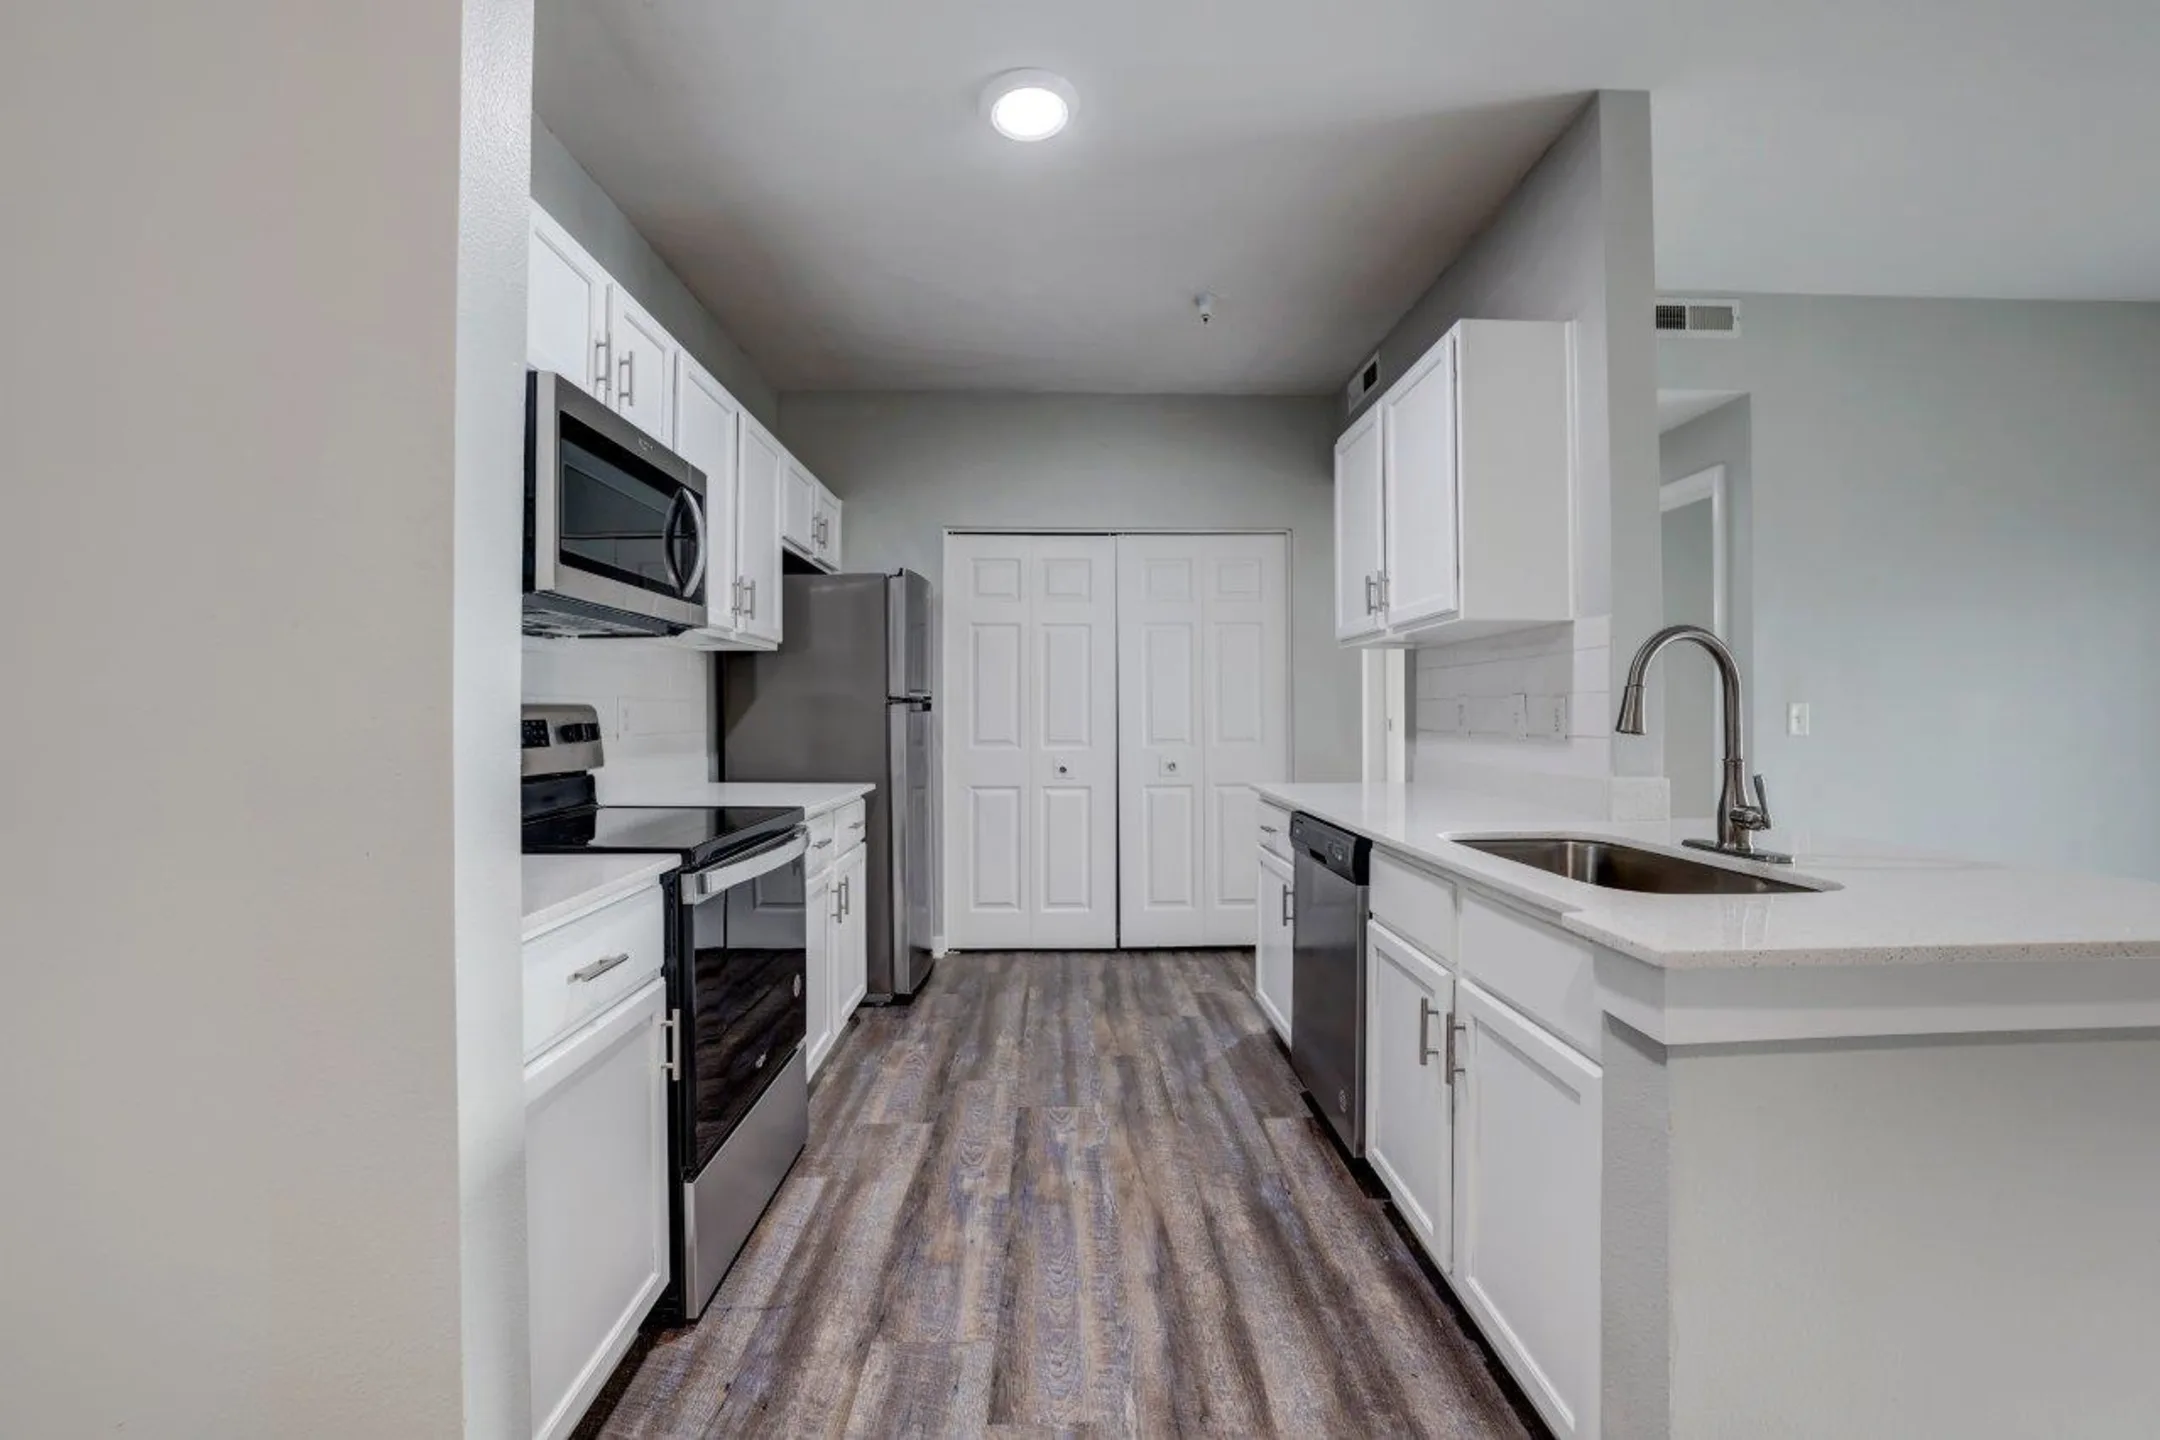 Kitchen - Selway Apartments - Meridian, ID